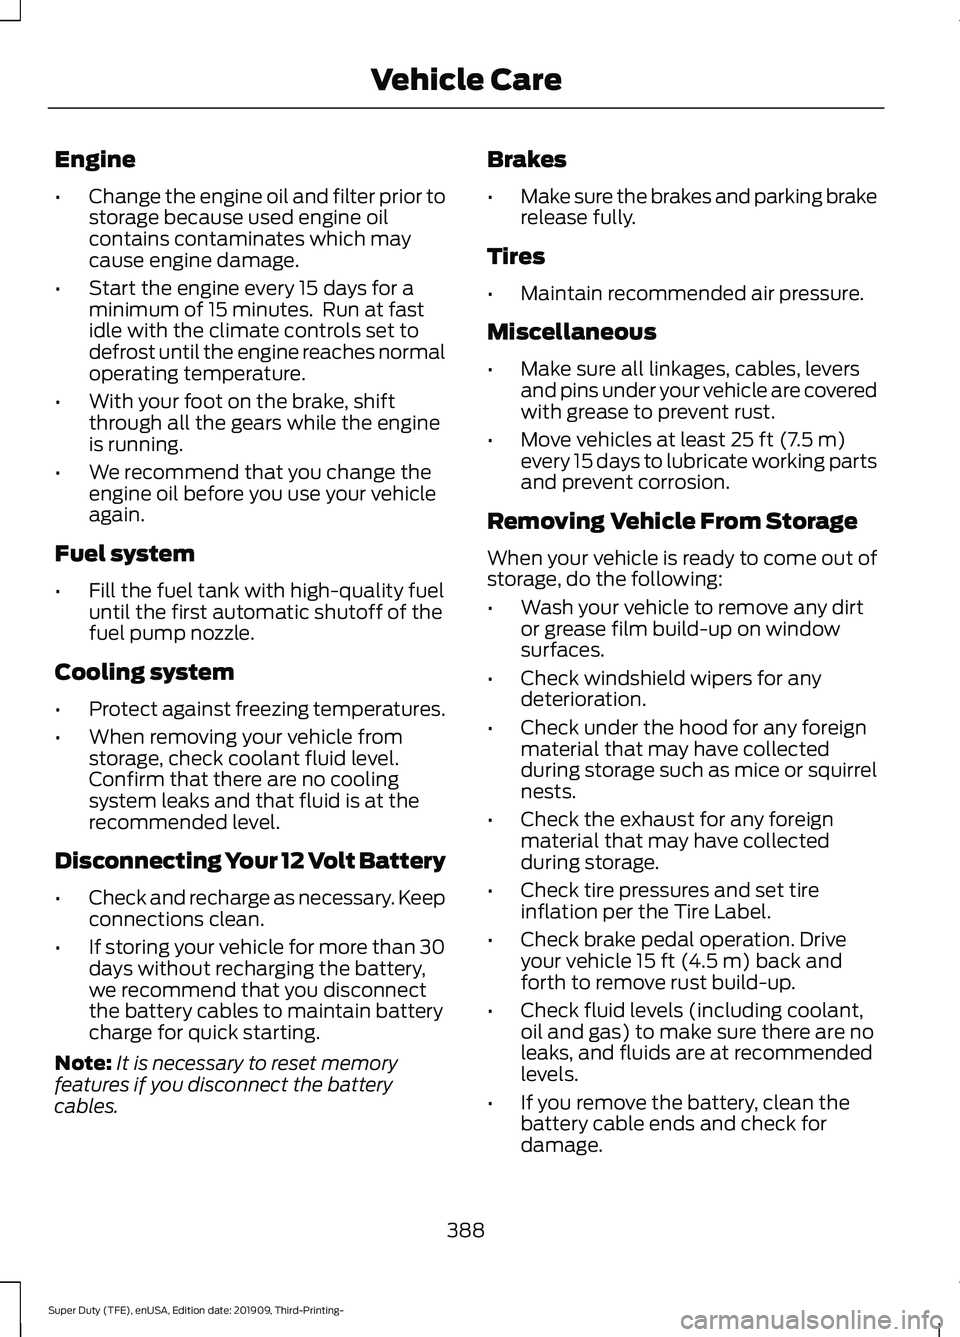 FORD F-550 2020  Owners Manual Engine
•
Change the engine oil and filter prior to
storage because used engine oil
contains contaminates which may
cause engine damage.
• Start the engine every 15 days for a
minimum of 15 minutes